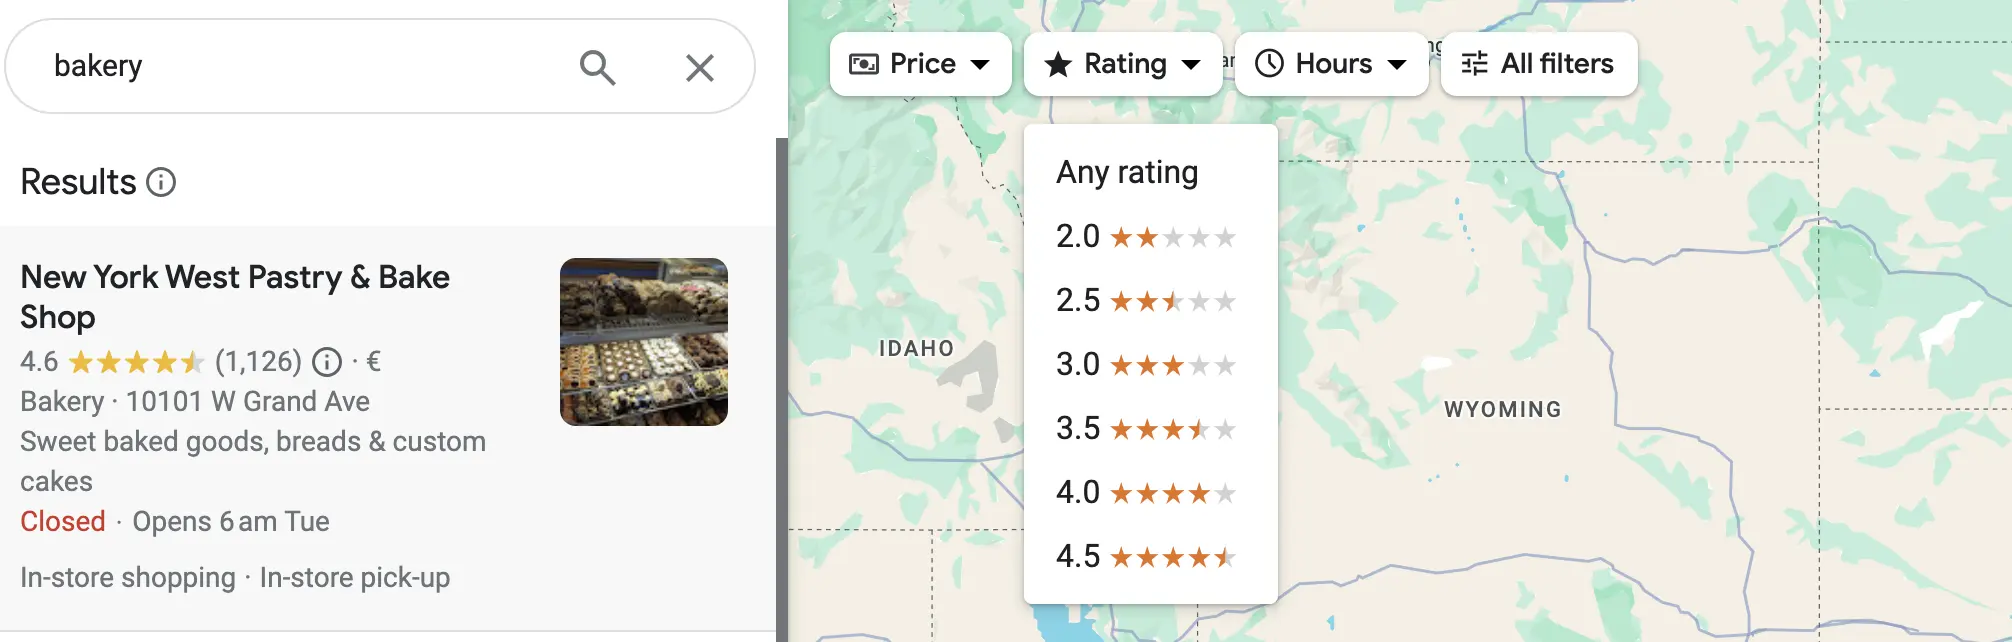 star rating affect visibility in search in google maps